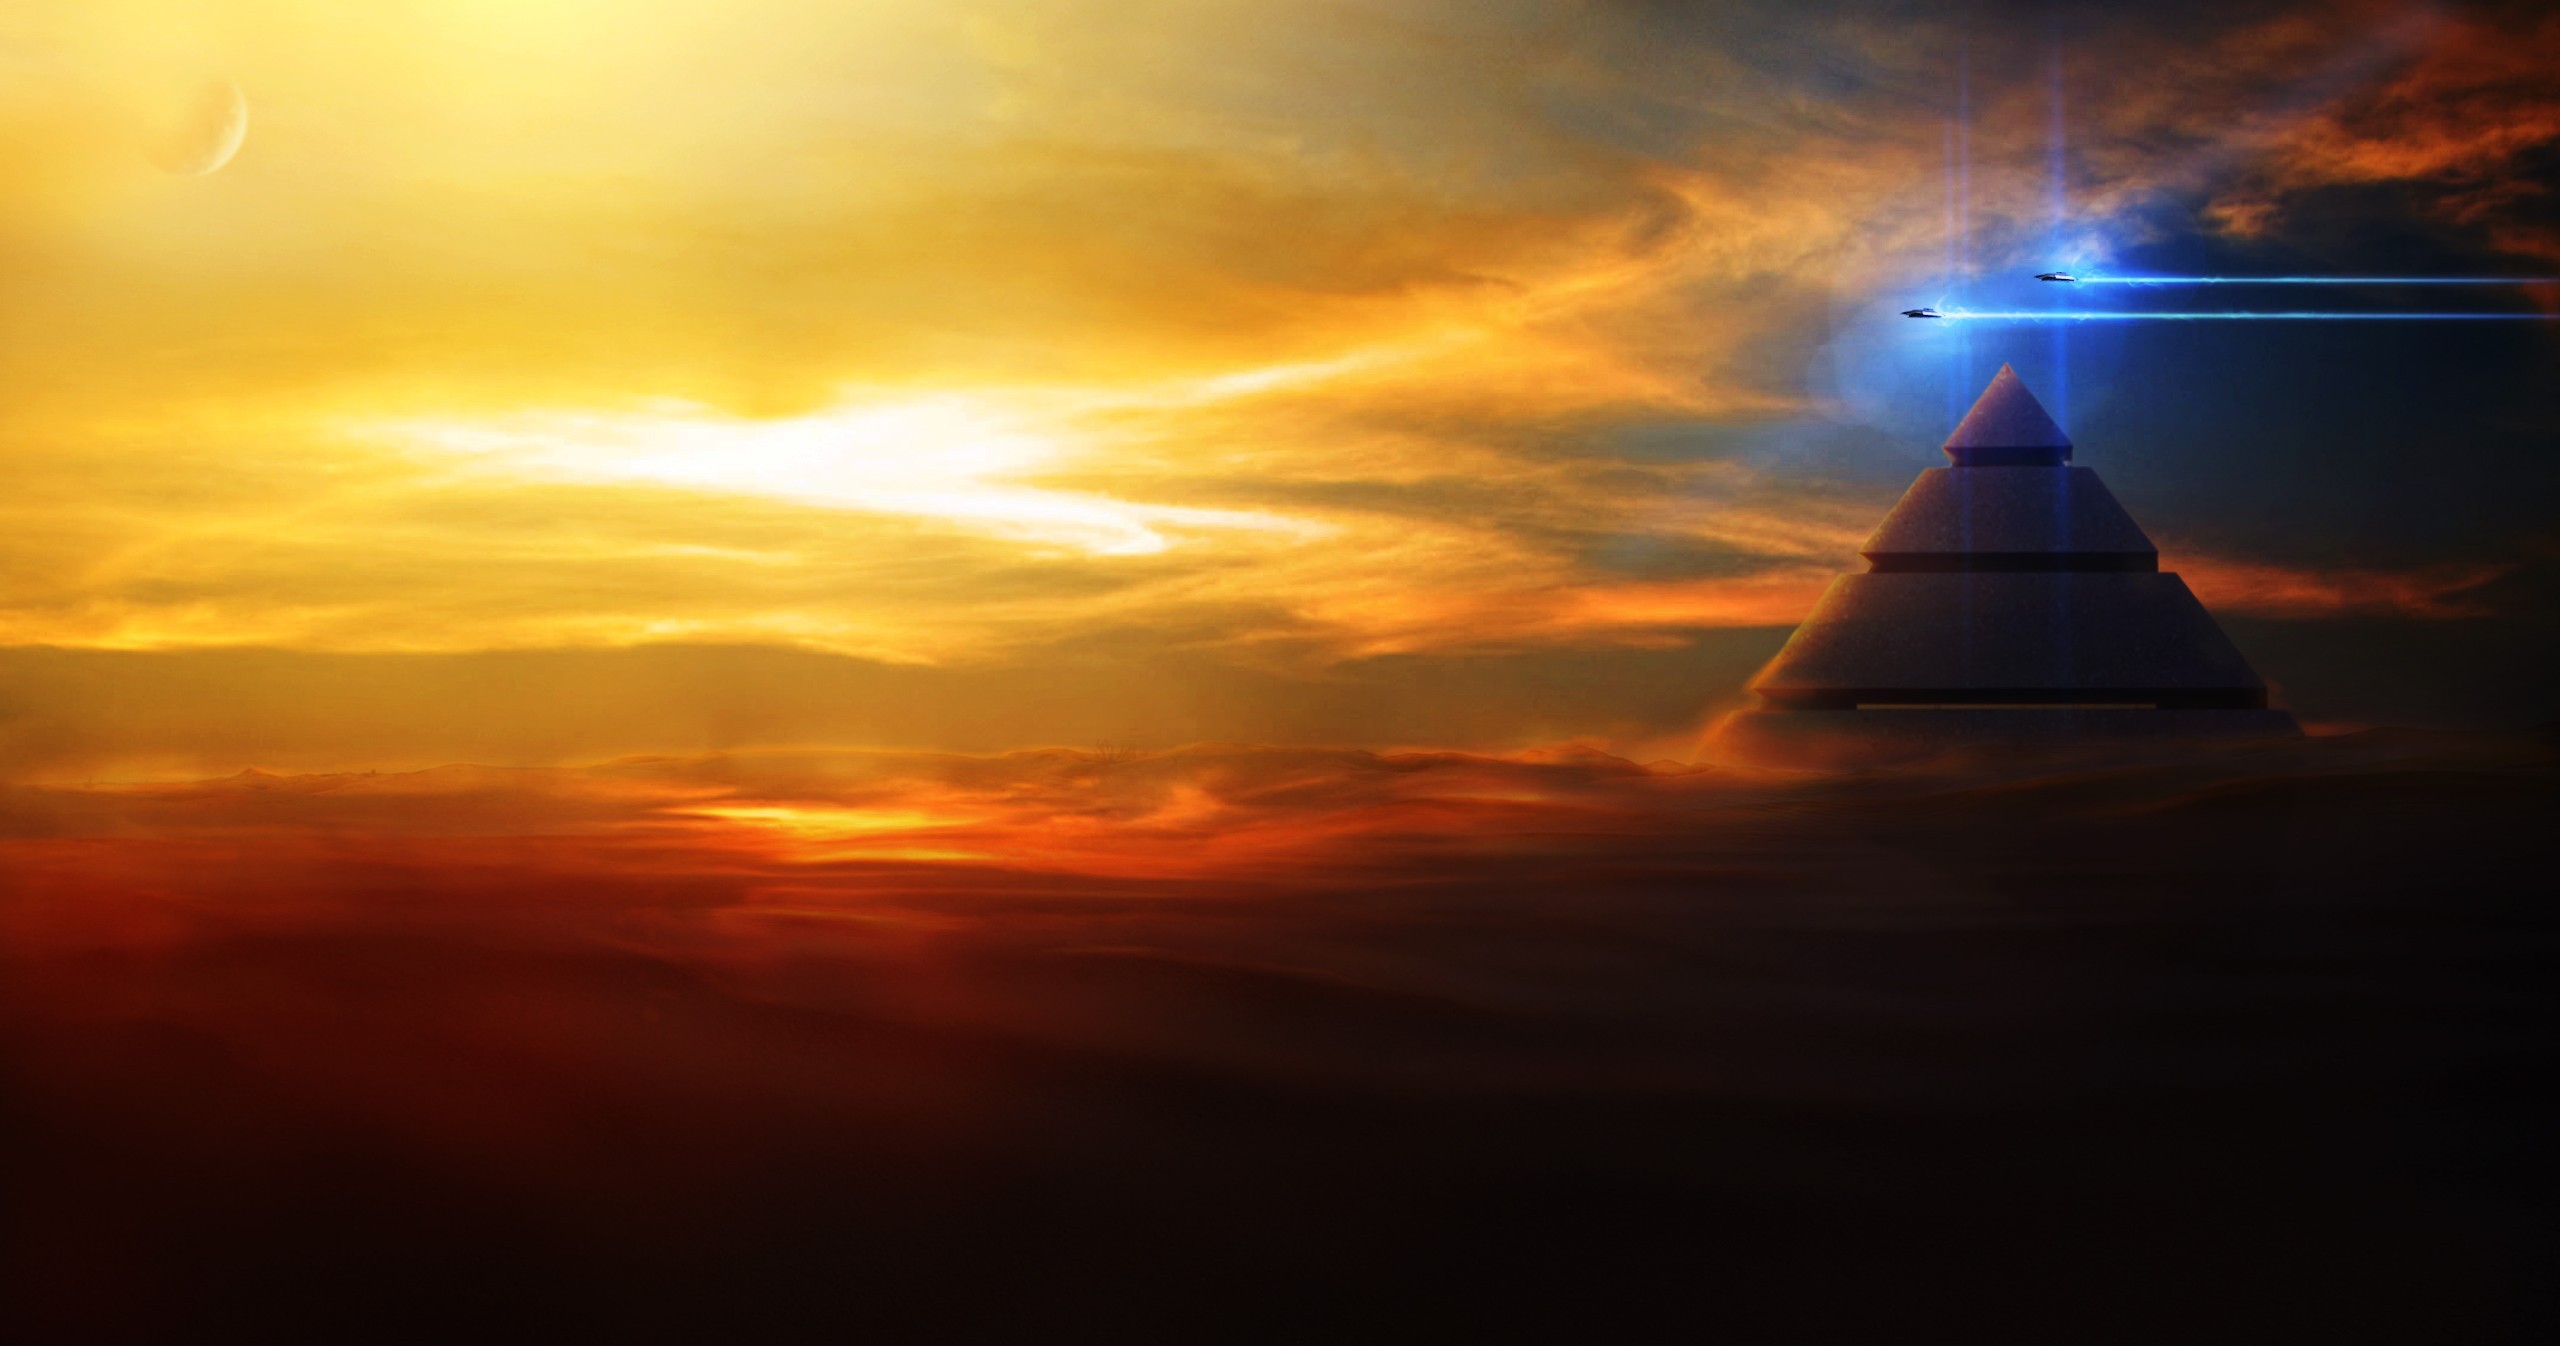 Alien Pyramid In The Sandstorm HD Wallpaper Background Image